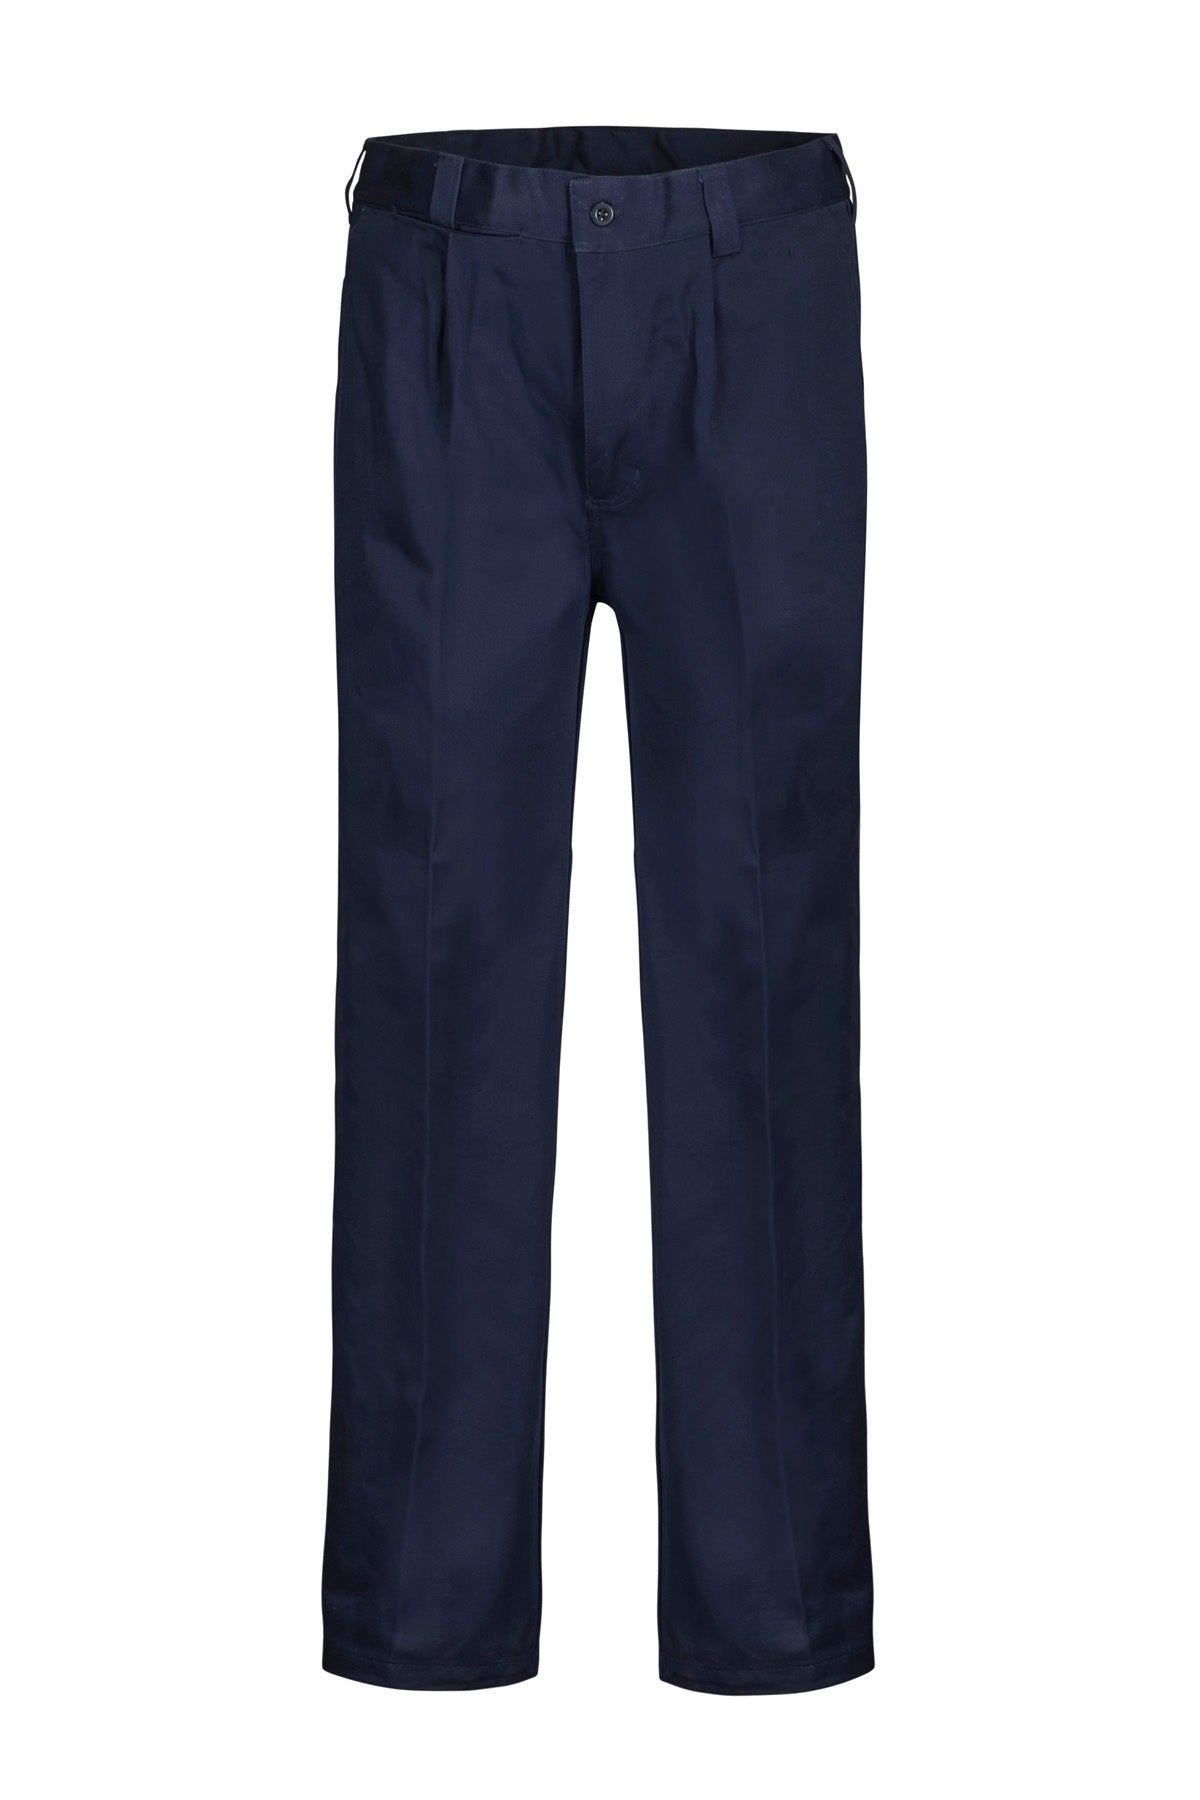 Classic Single Pleat Cotton Drill Trouser - made by Workcraft